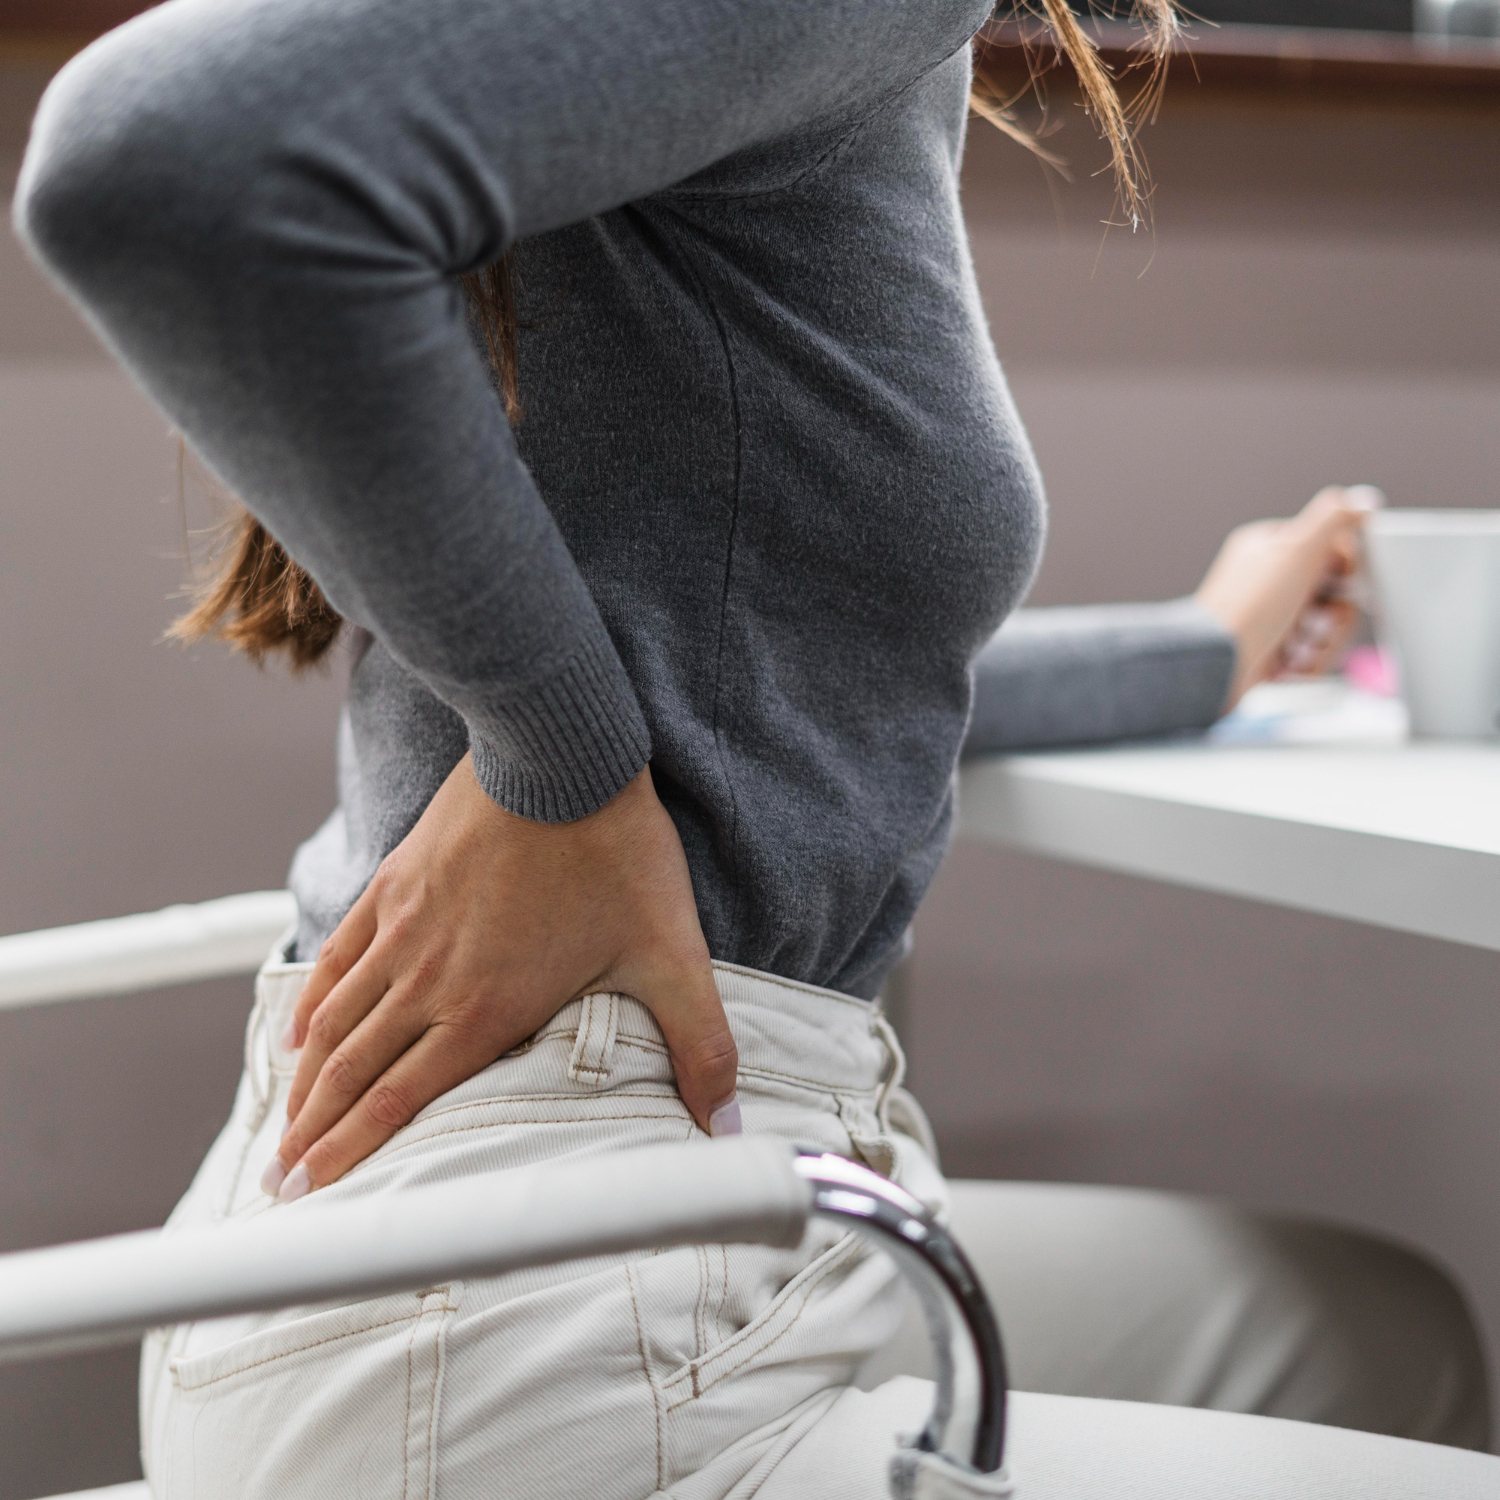 What Causes Your Back Pain